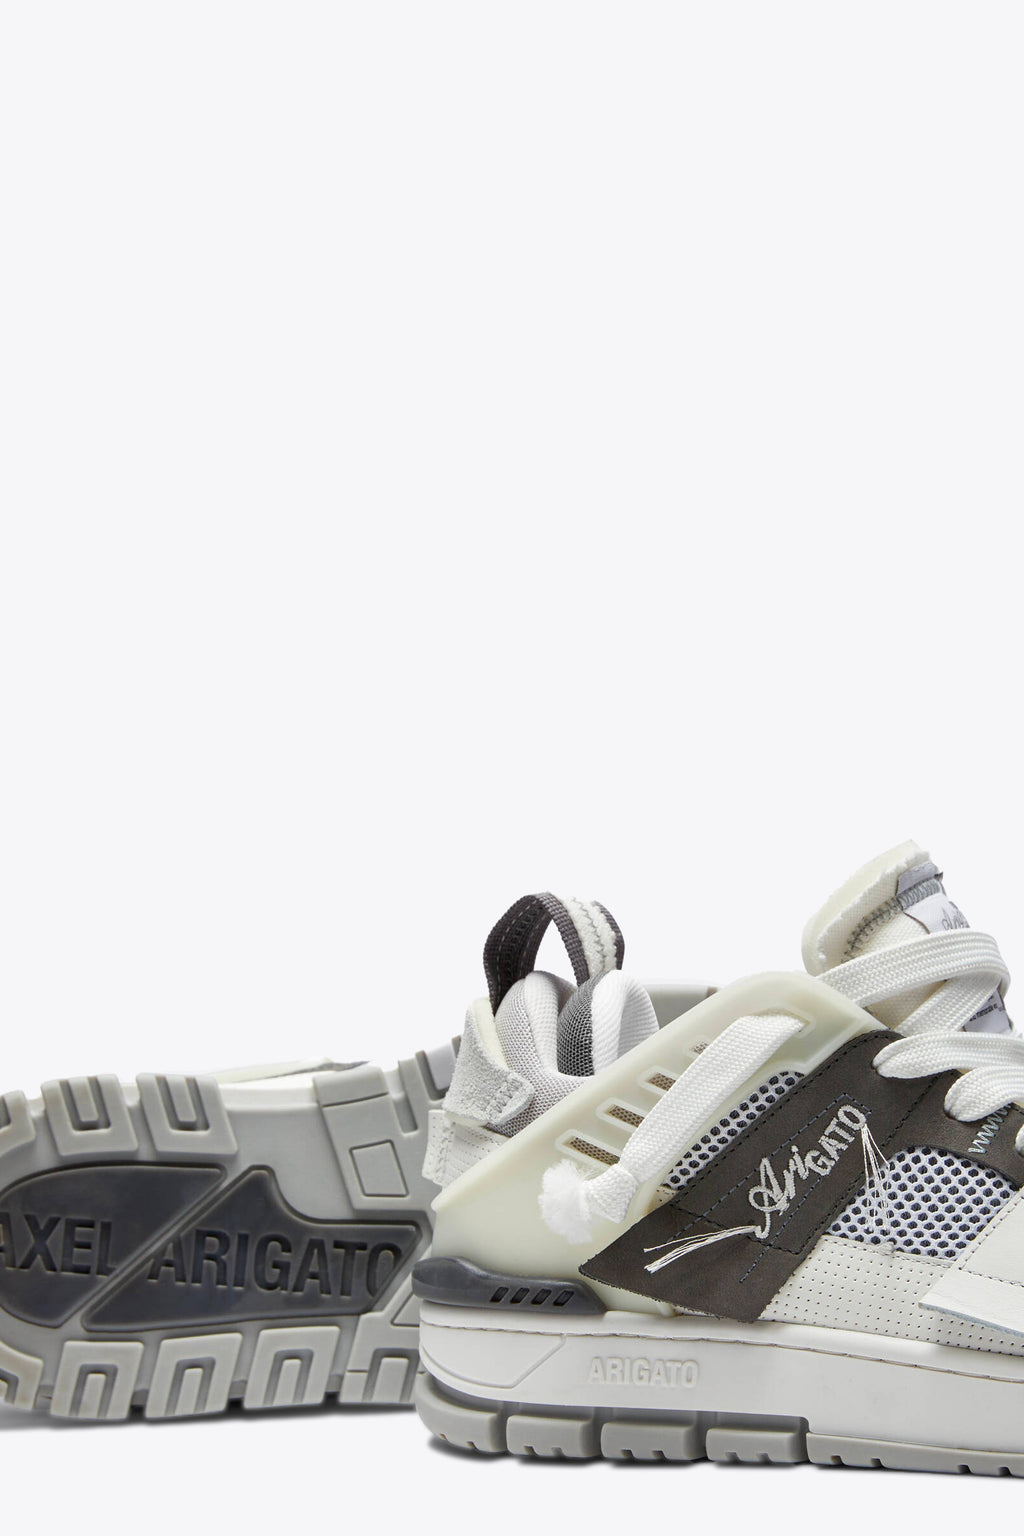 alt-image__White-and-grey-low-sneaker---Area-Patchwork-Sneaker-